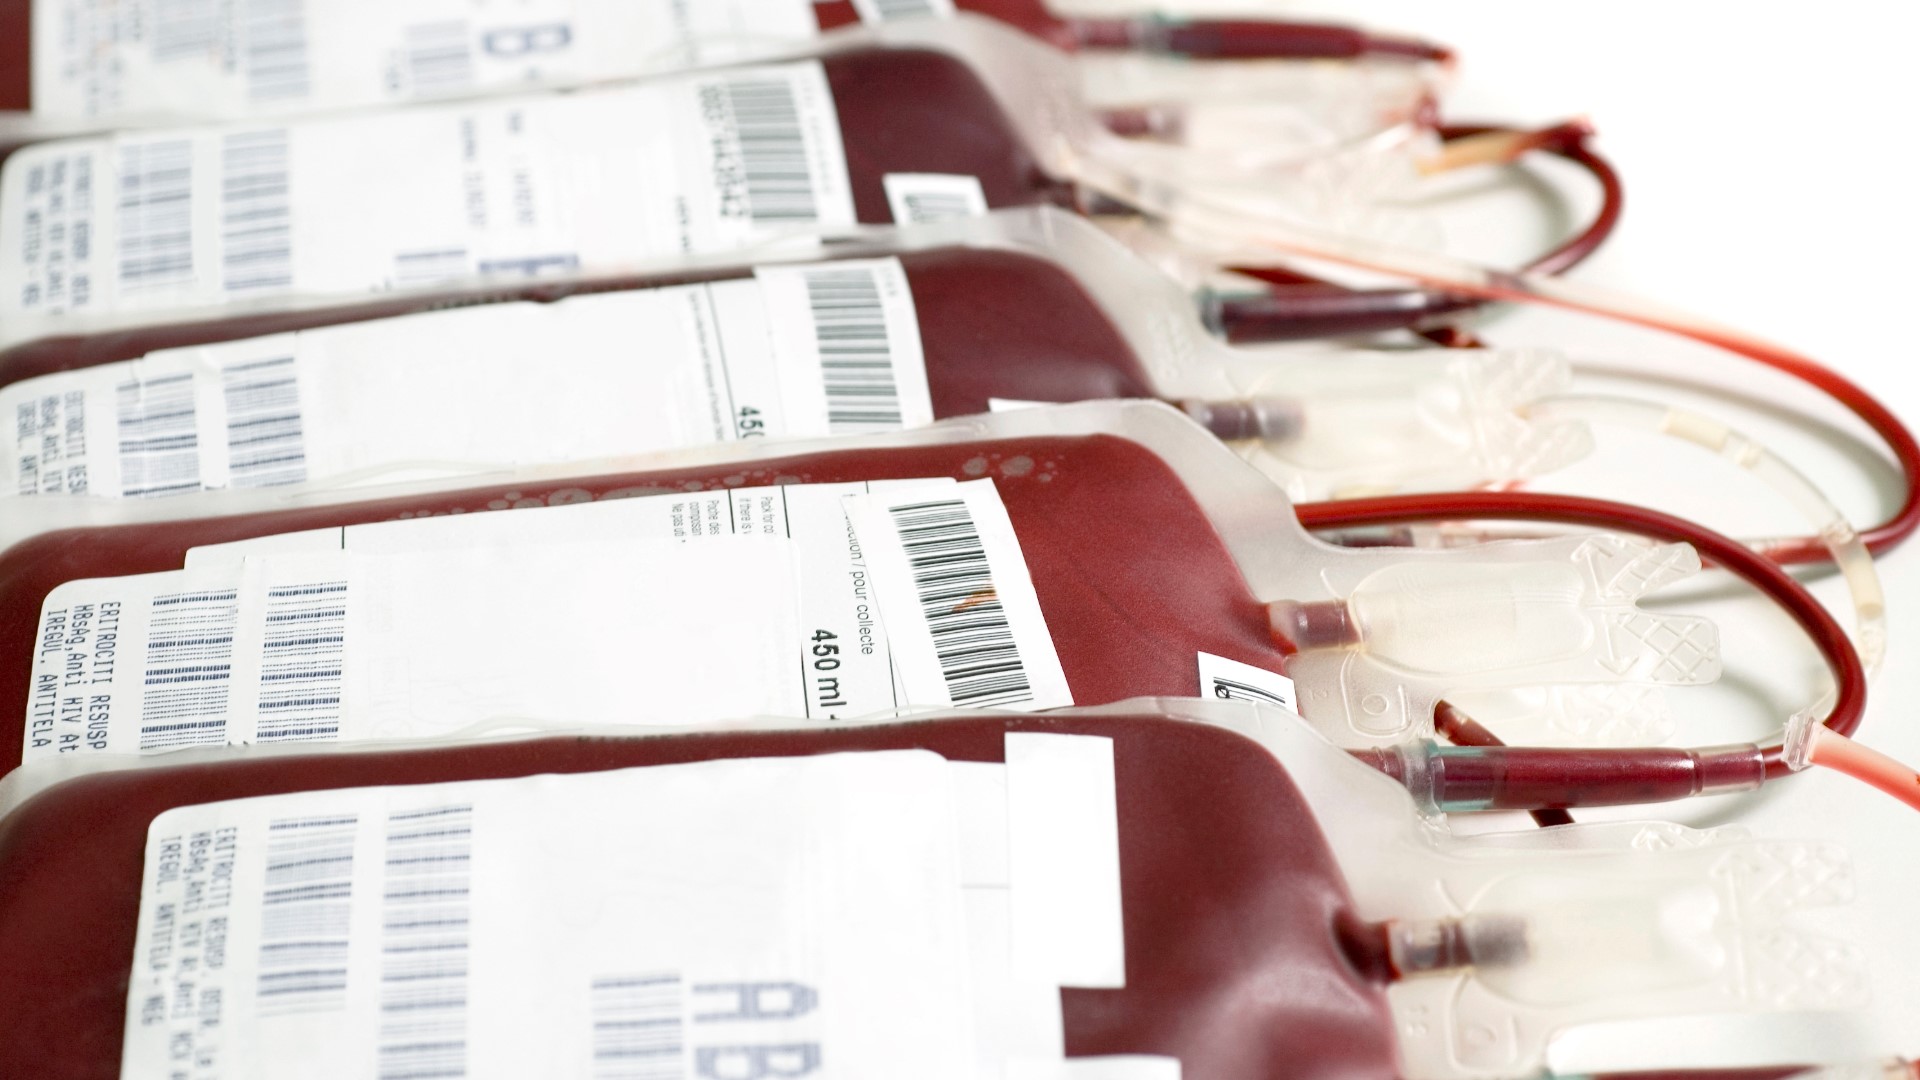 The COVID-19 pandemic in 2020 has strained blood centers across the country.